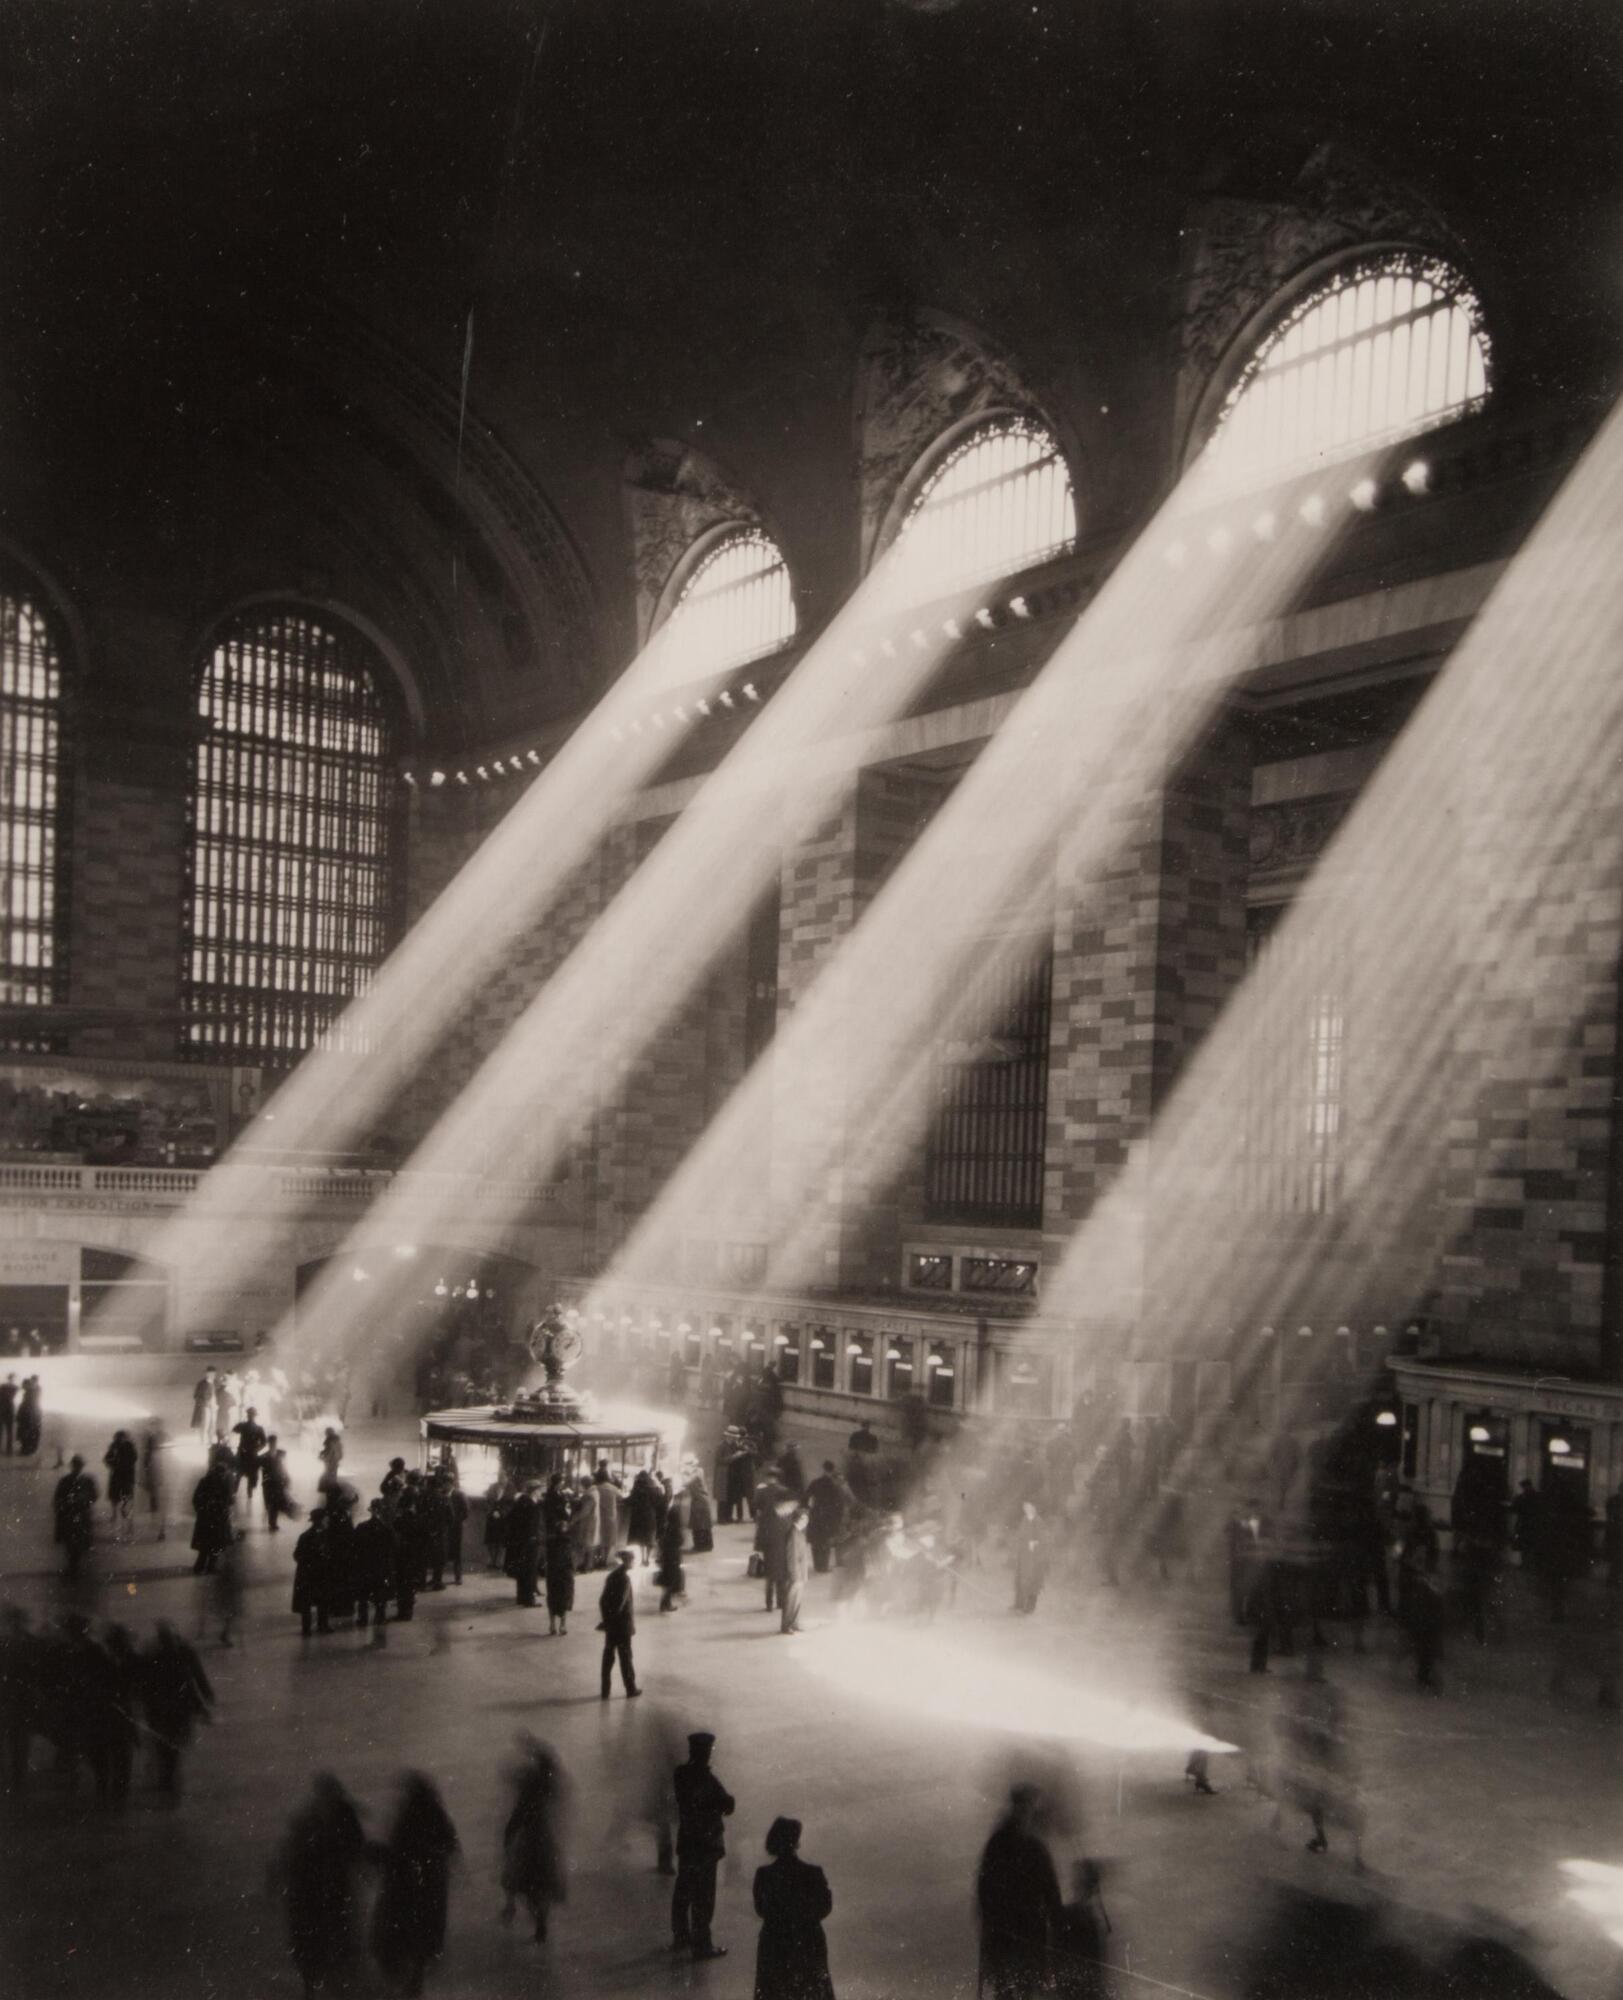 A black and white photograph of a cavernous building. Beams of light stream in through the windows, revealing a smoky atmosphere as people move about the main concourse below.